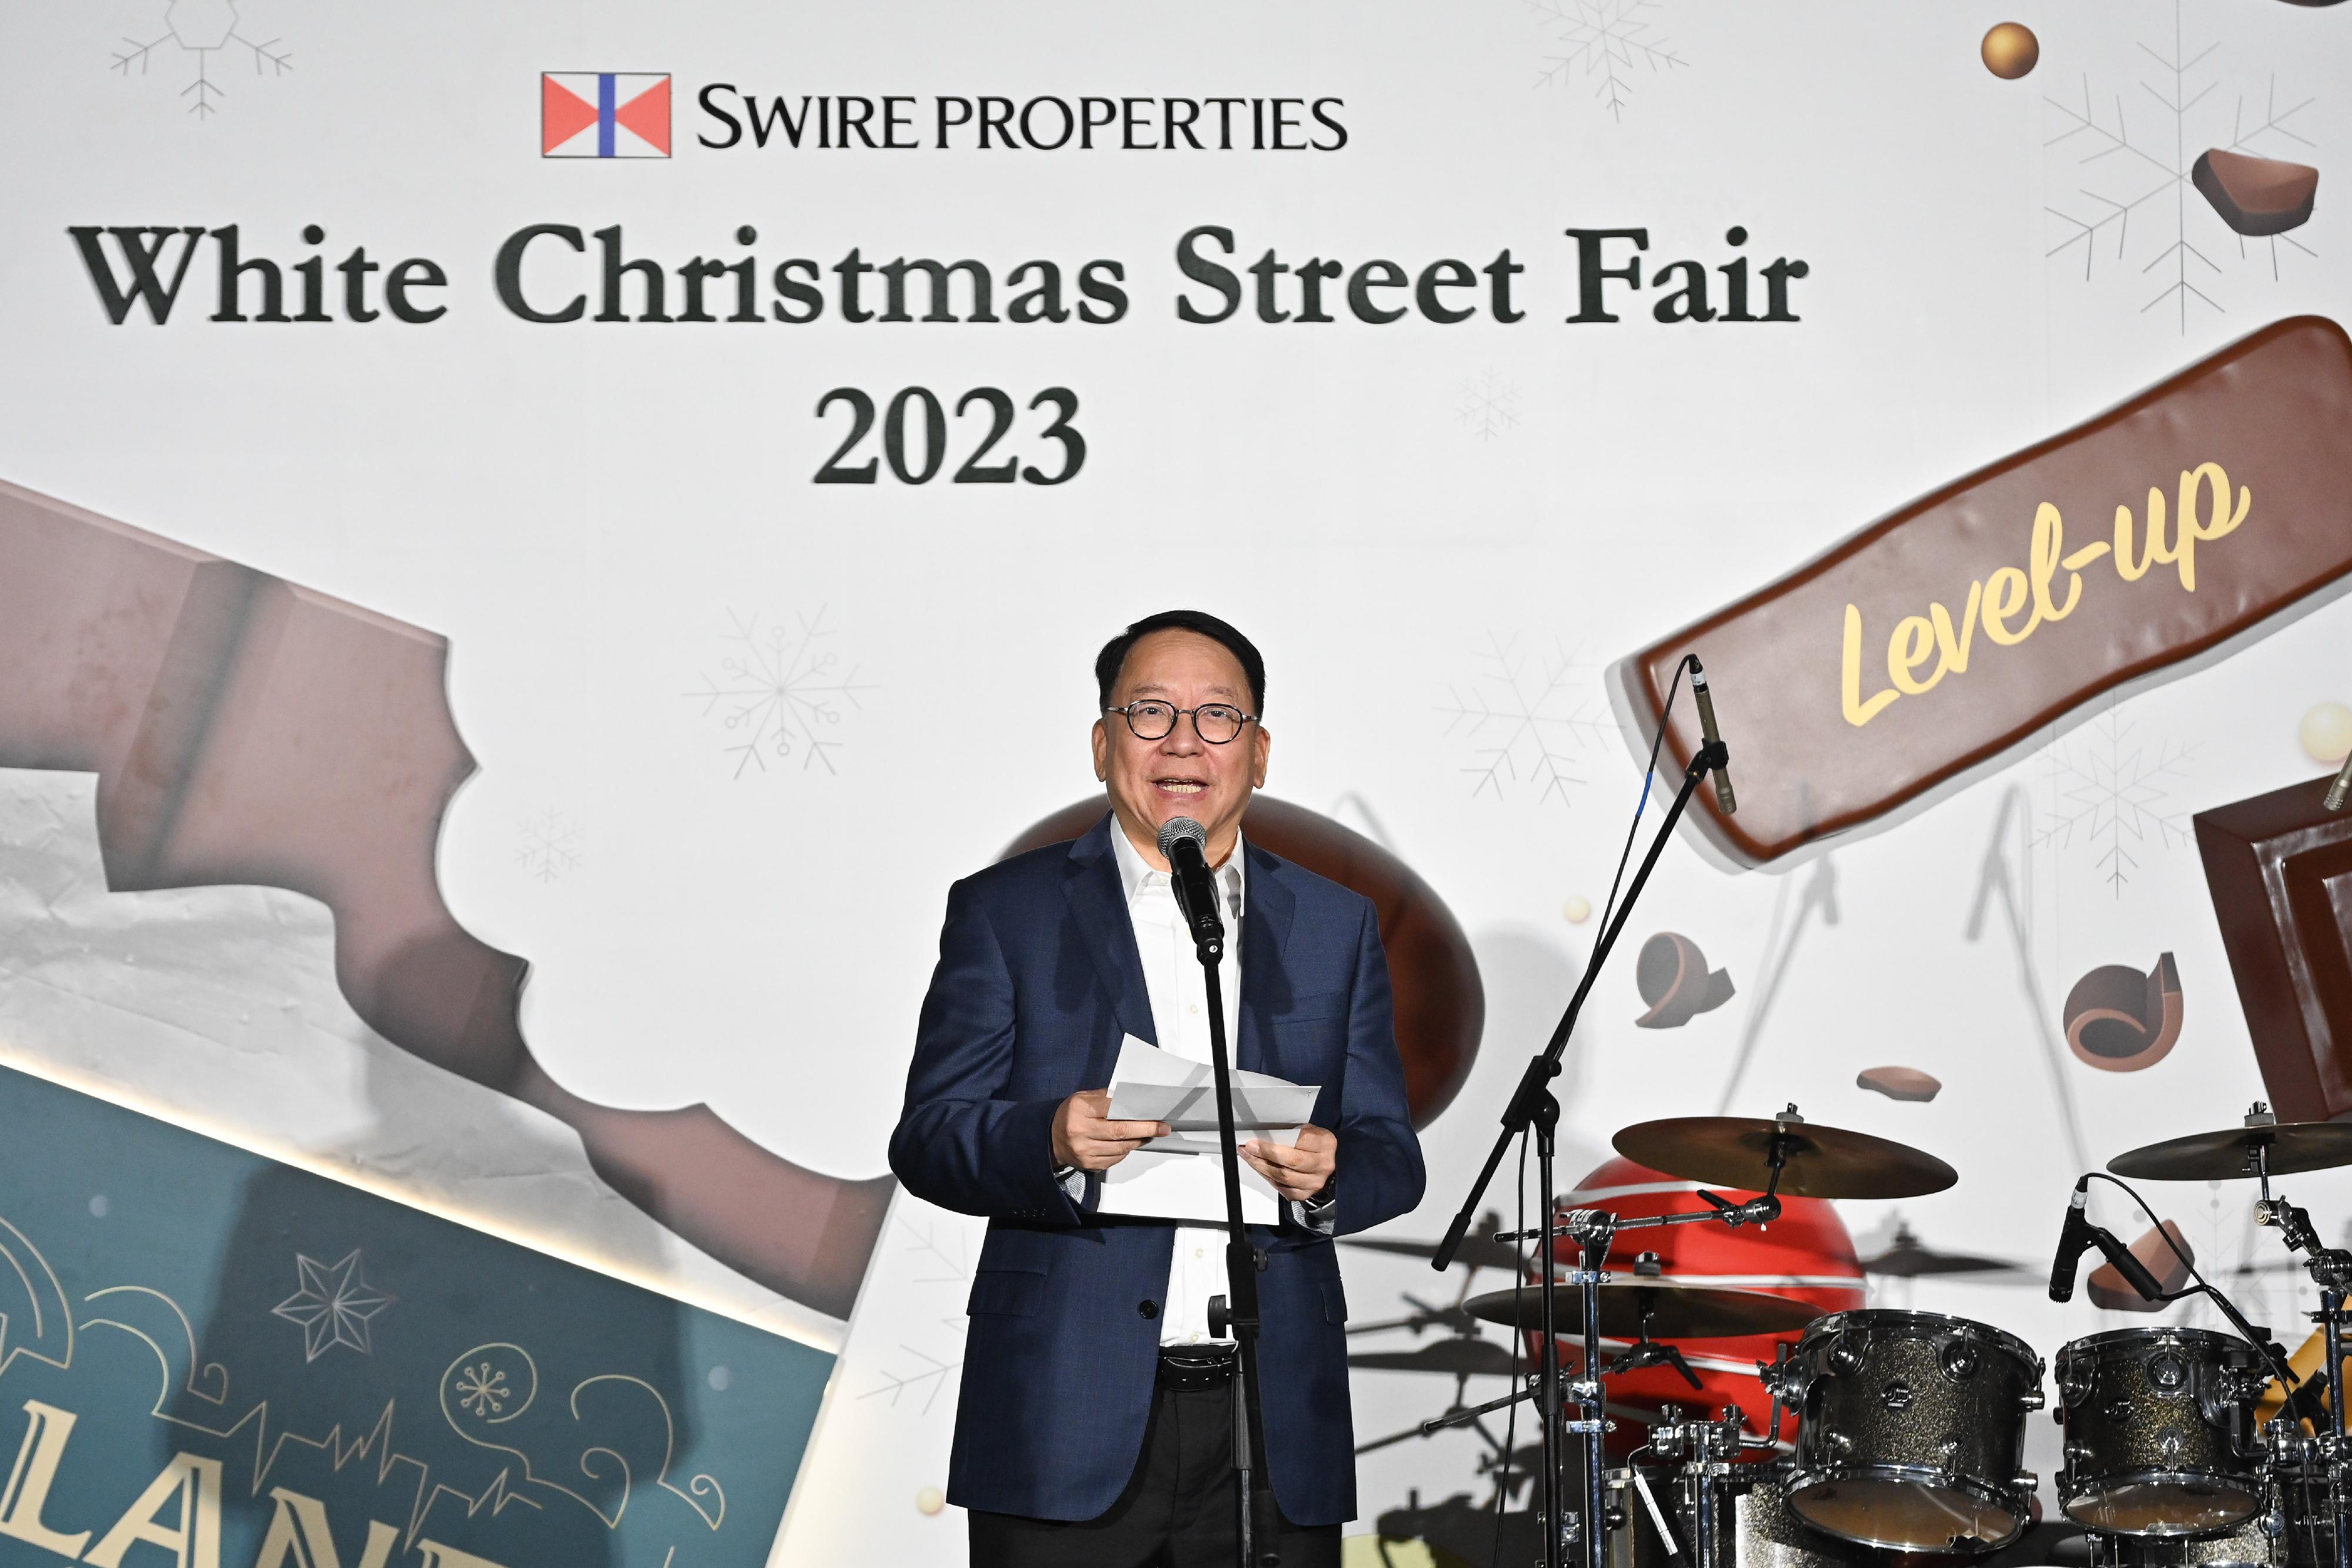 The Chief Secretary for Administration, Mr Chan Kwok-ki, speaks at the Opening Ceremony of the White Christmas Street Fair 2023 today (November 30).